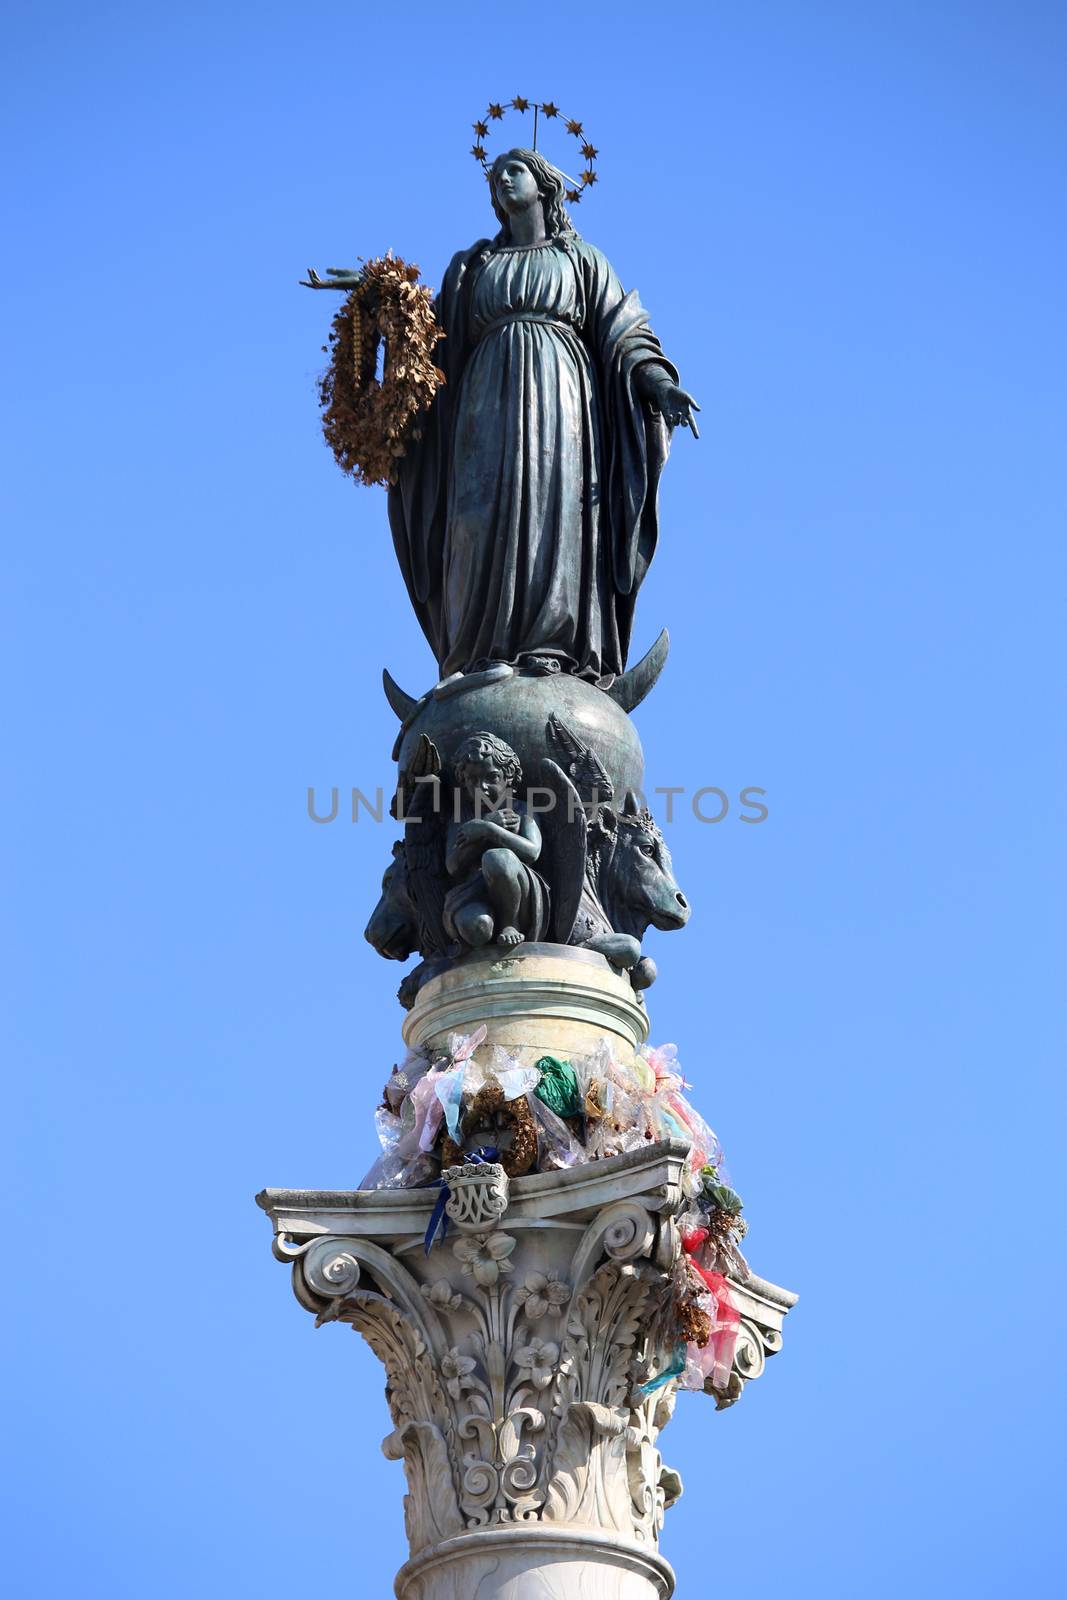 Virgin Mary on top at Piazza di Spagna in Rome, Italy by vladacanon